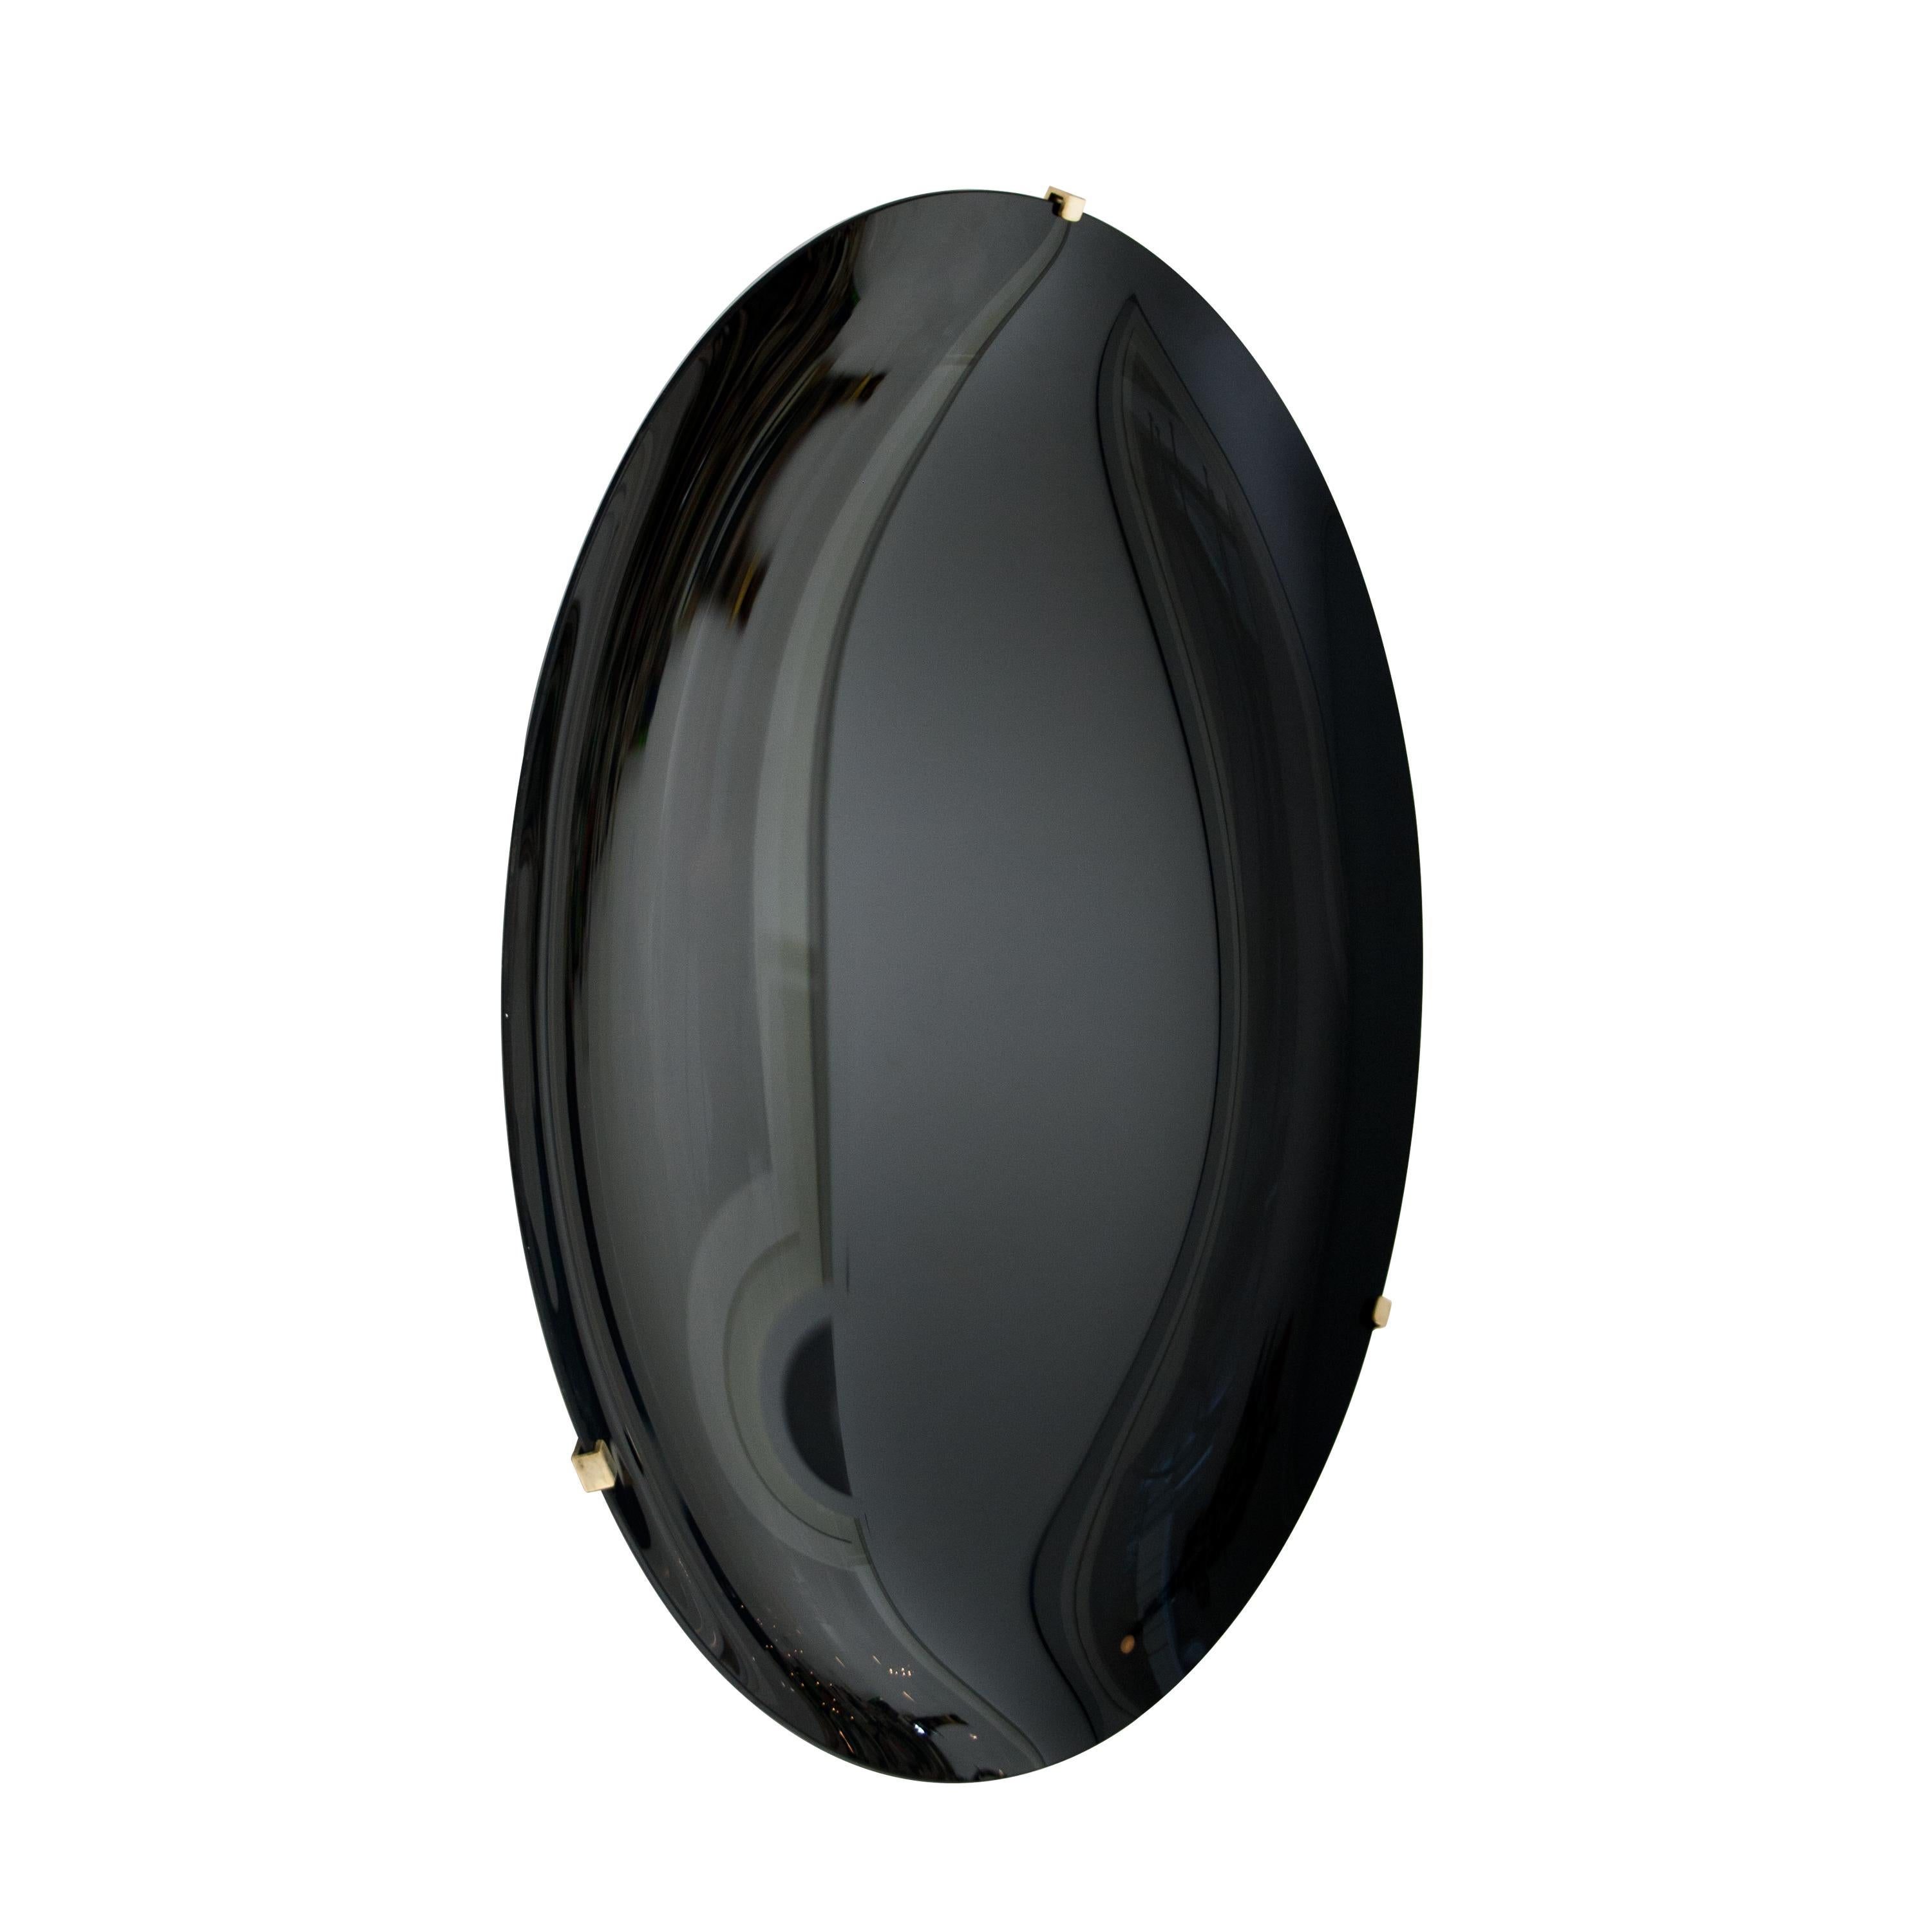 Mid-Century Modern Italian Black Concave Hand-Crafted Murano Glass Rounded Mirror, Italy, 2020